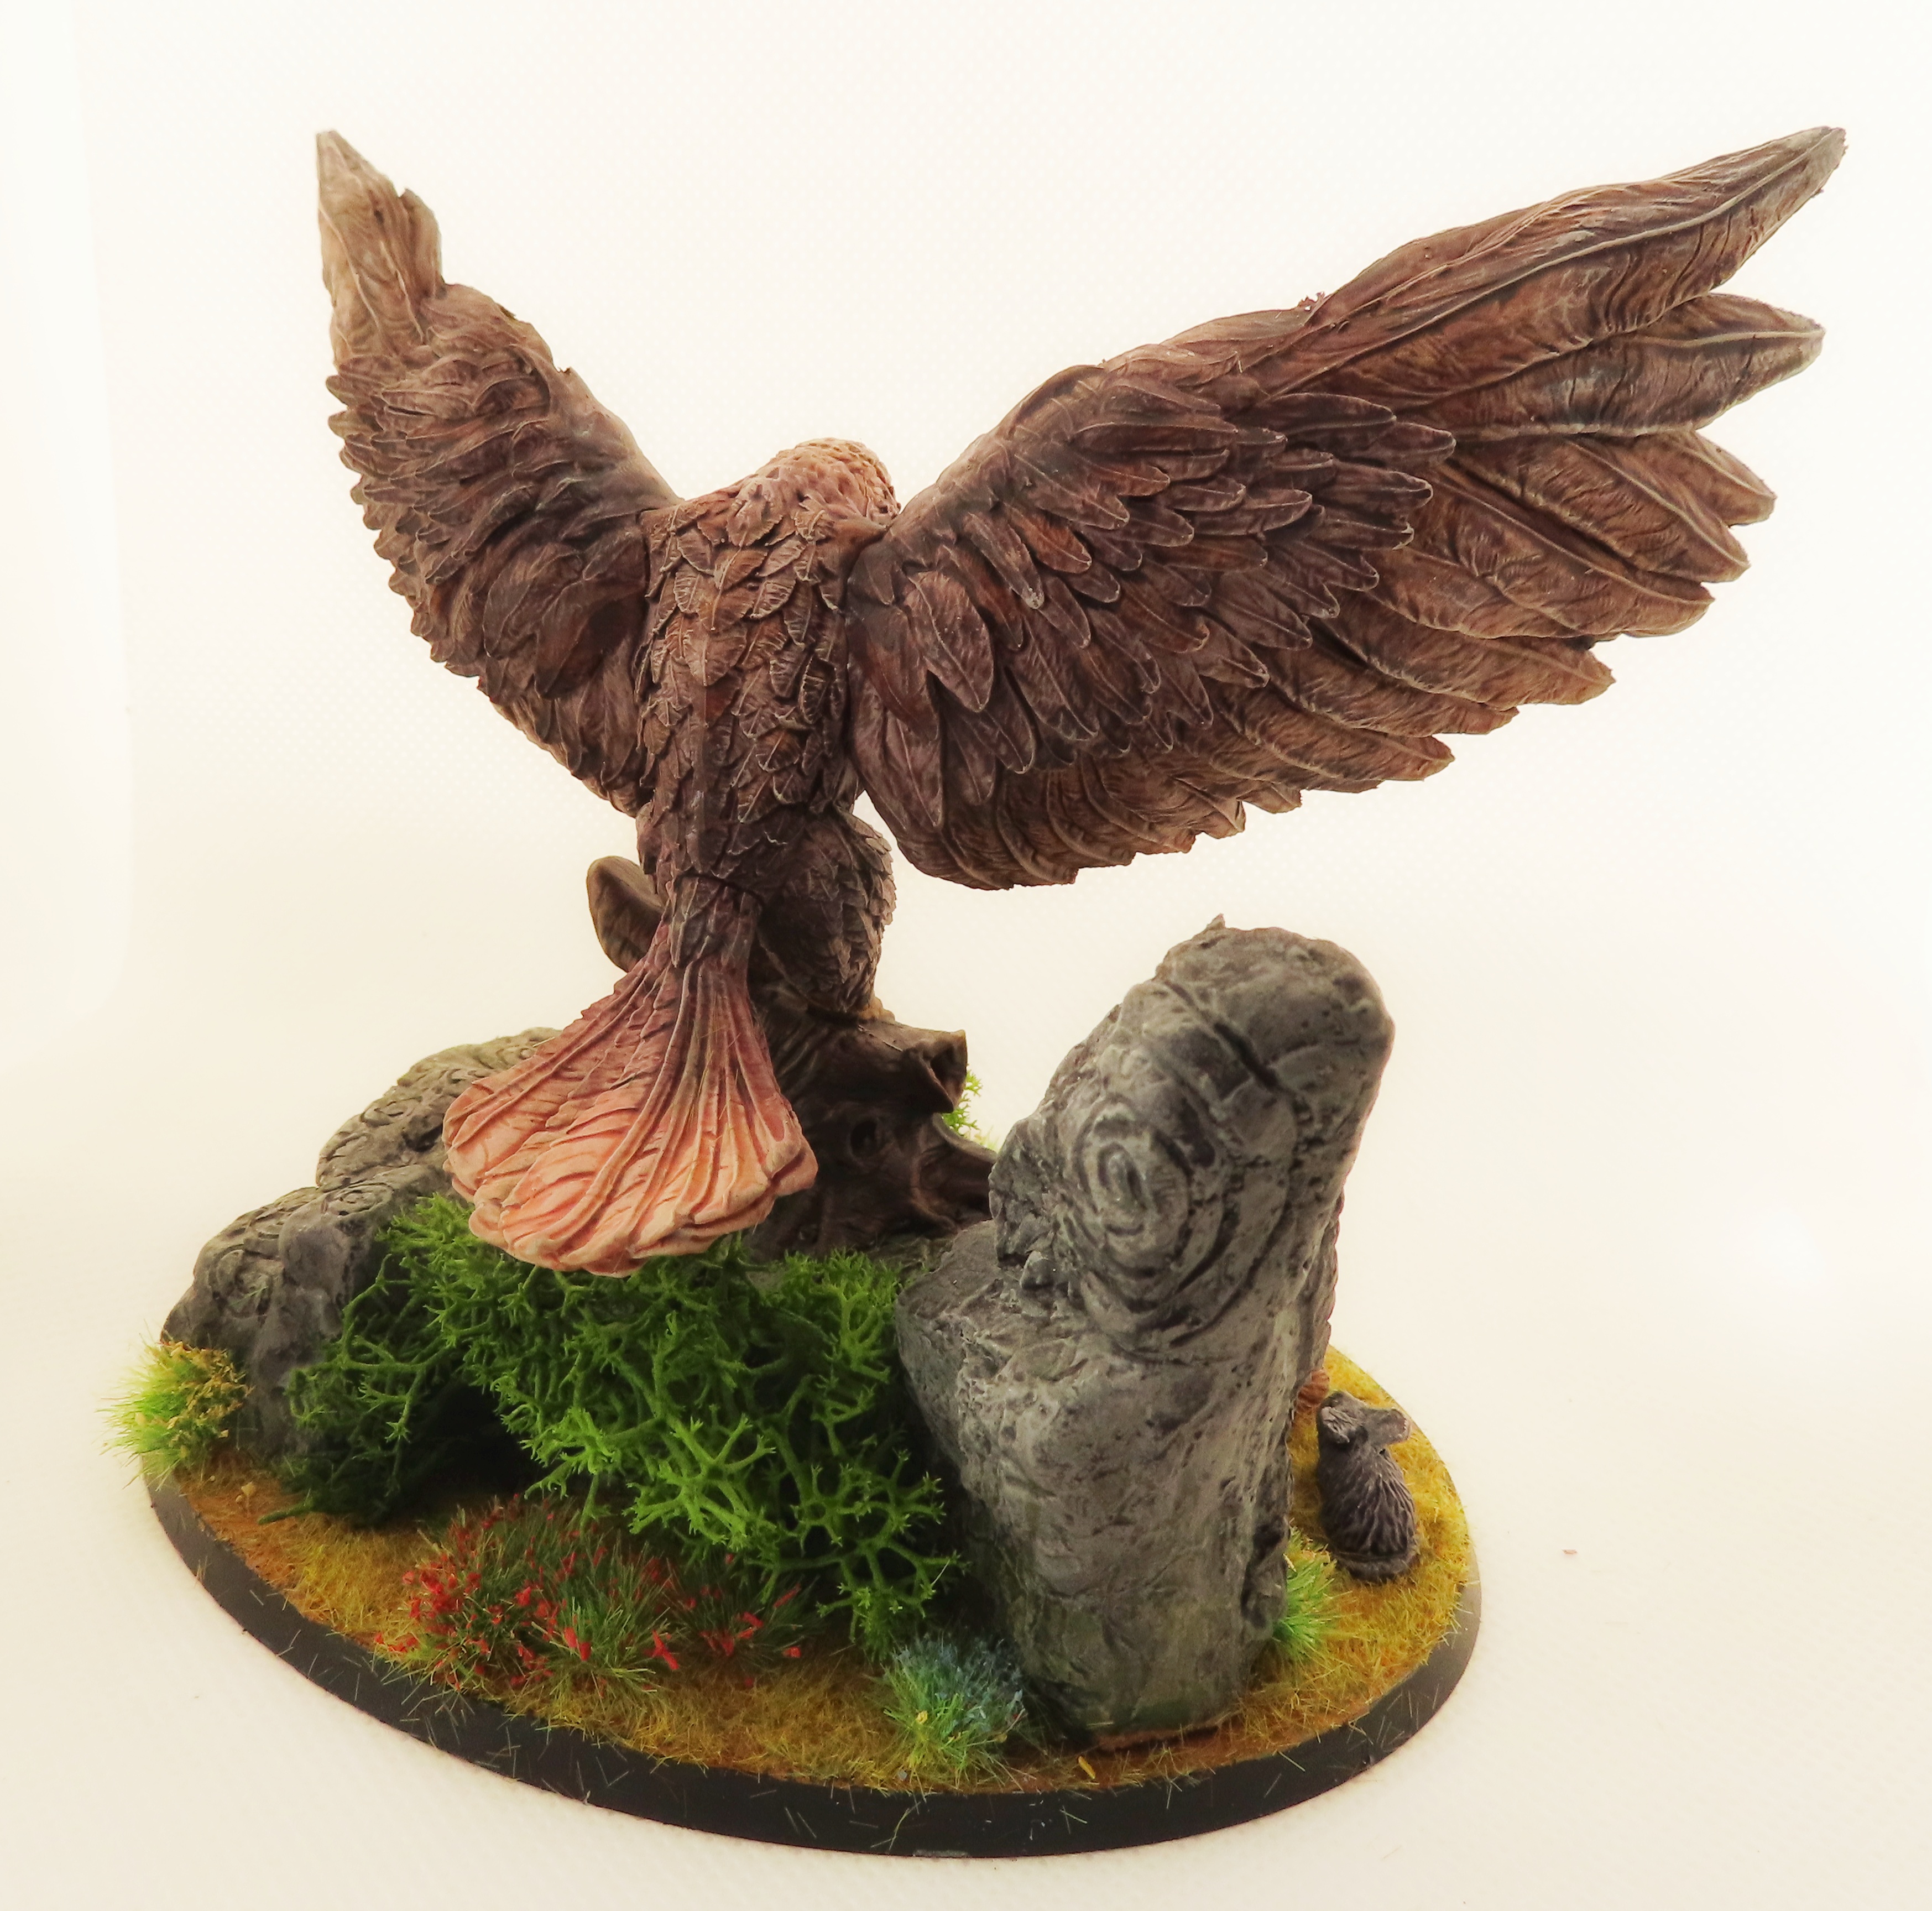 Eagle Diorama #3 by thedace